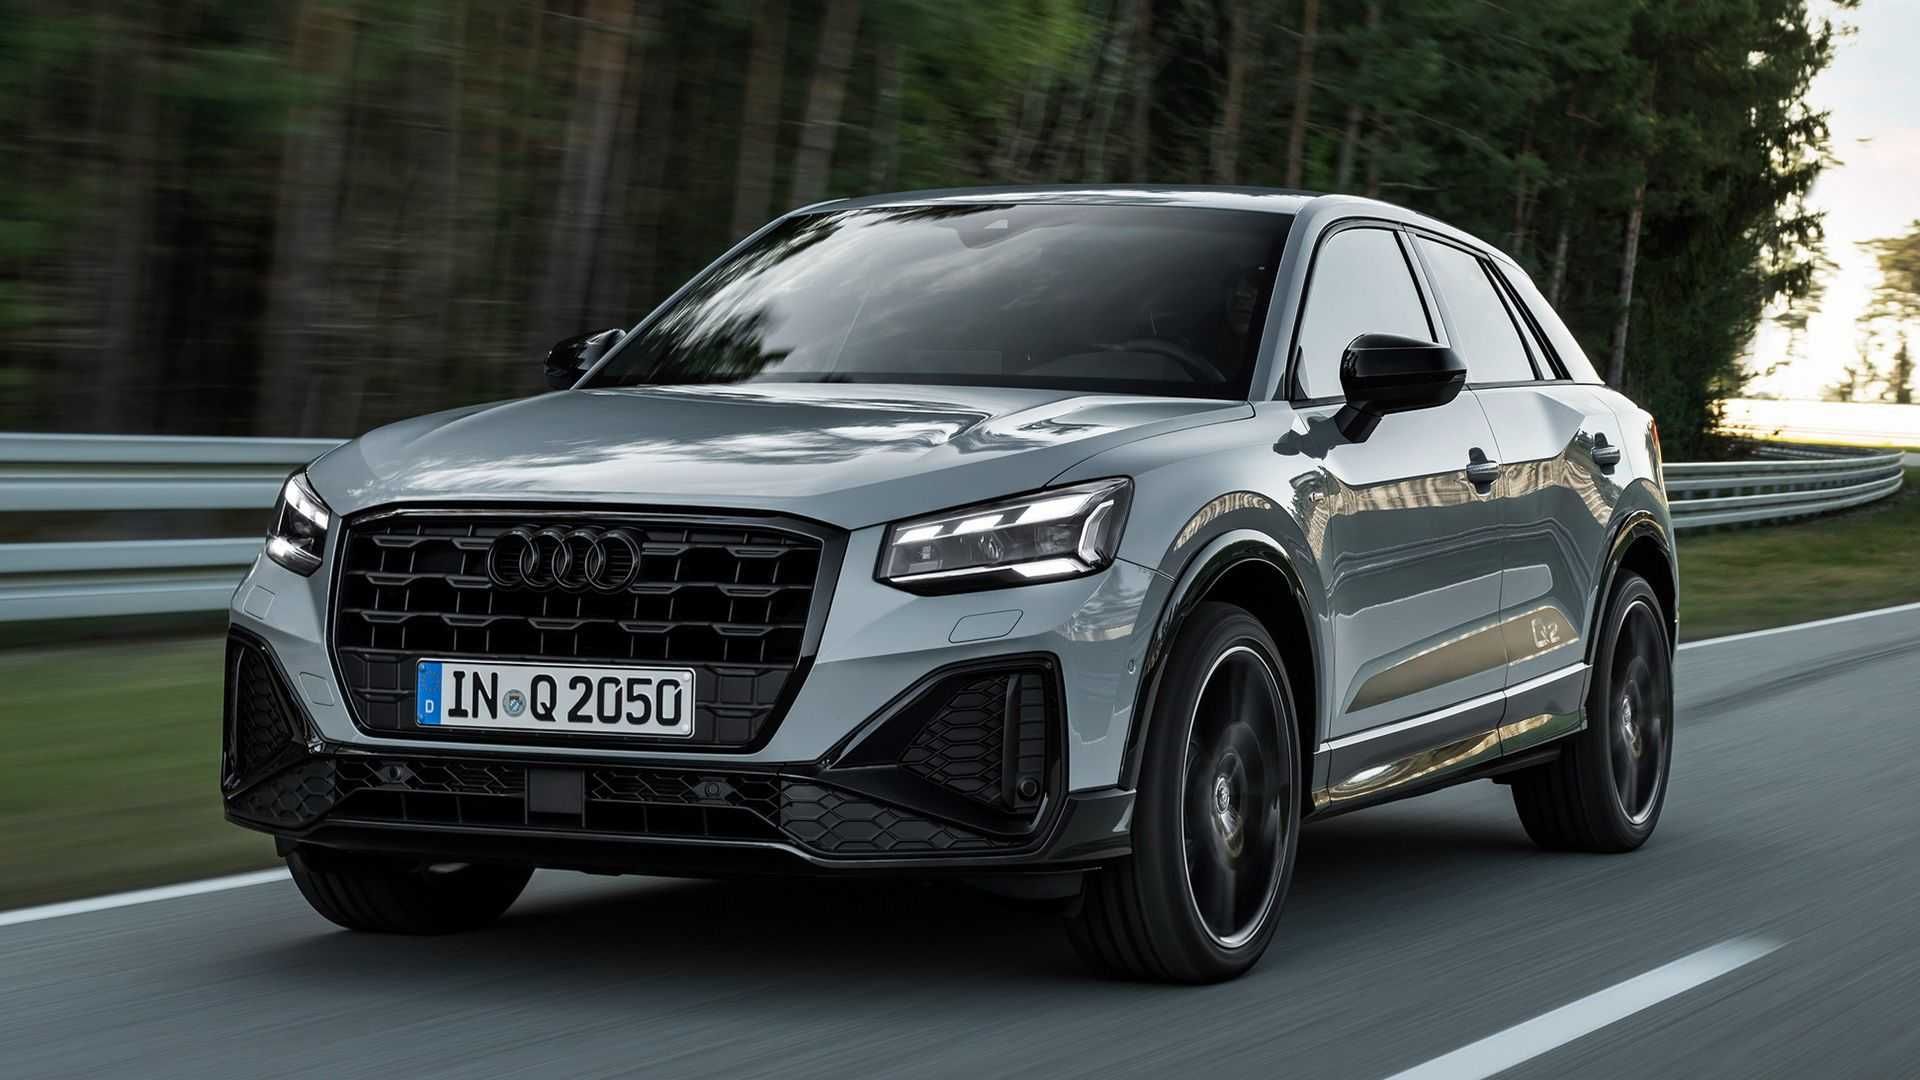 Why The Audi Q2 Will Be Discontinued After Only One Generation